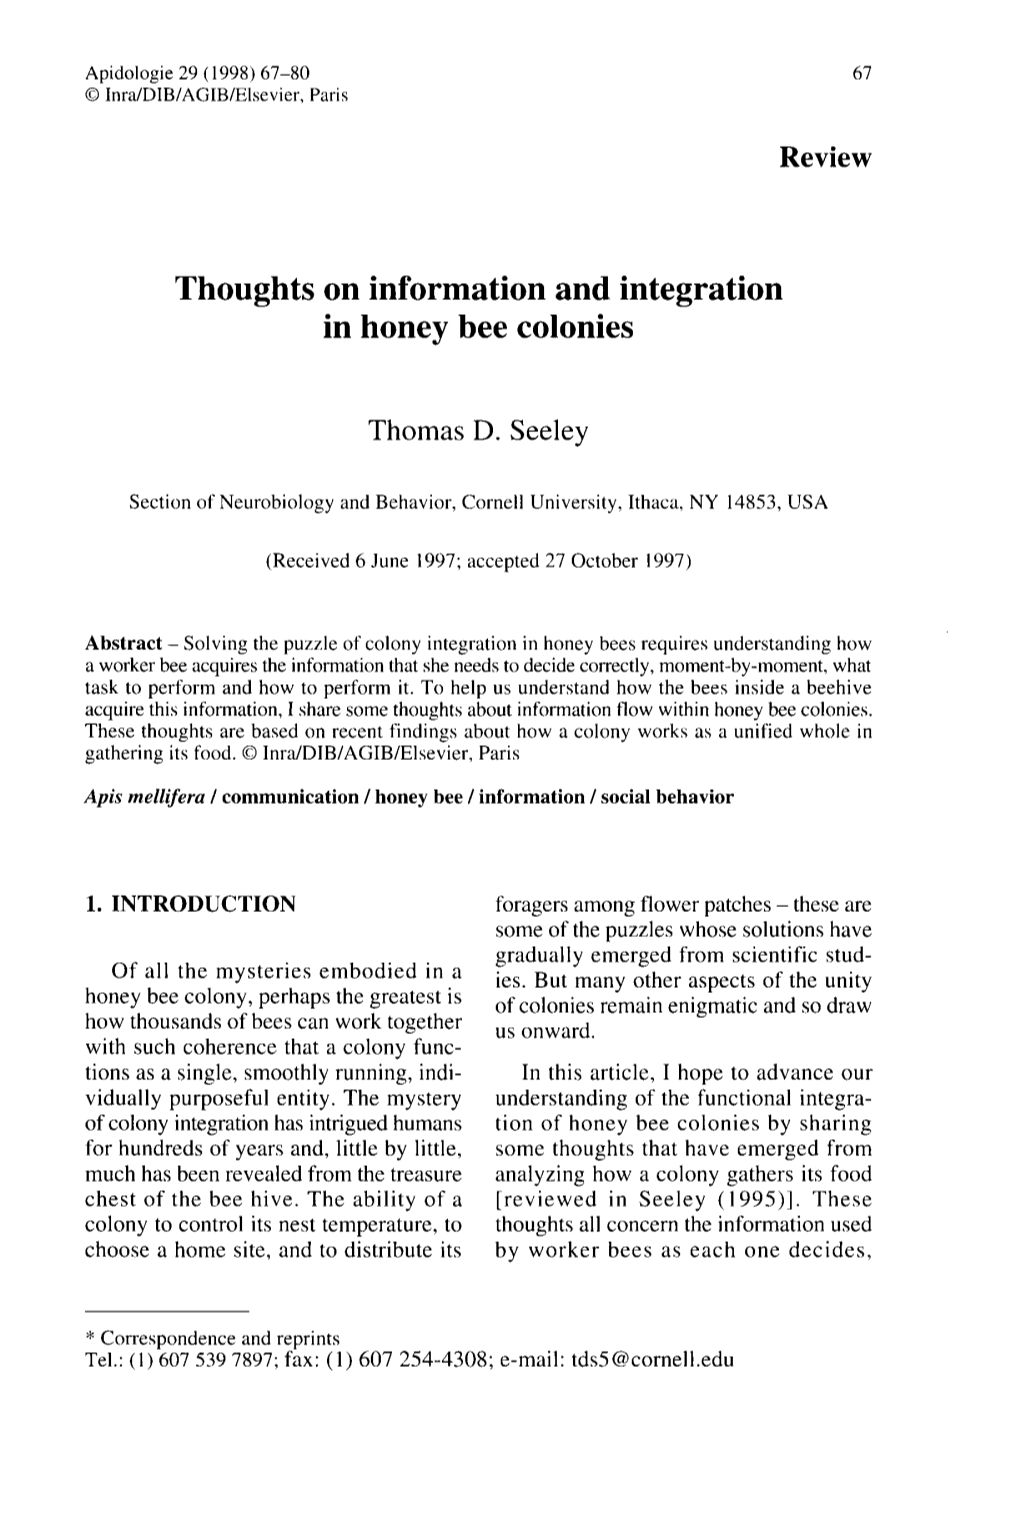 Thoughts on Information and Integration in Honey Bee Colonies